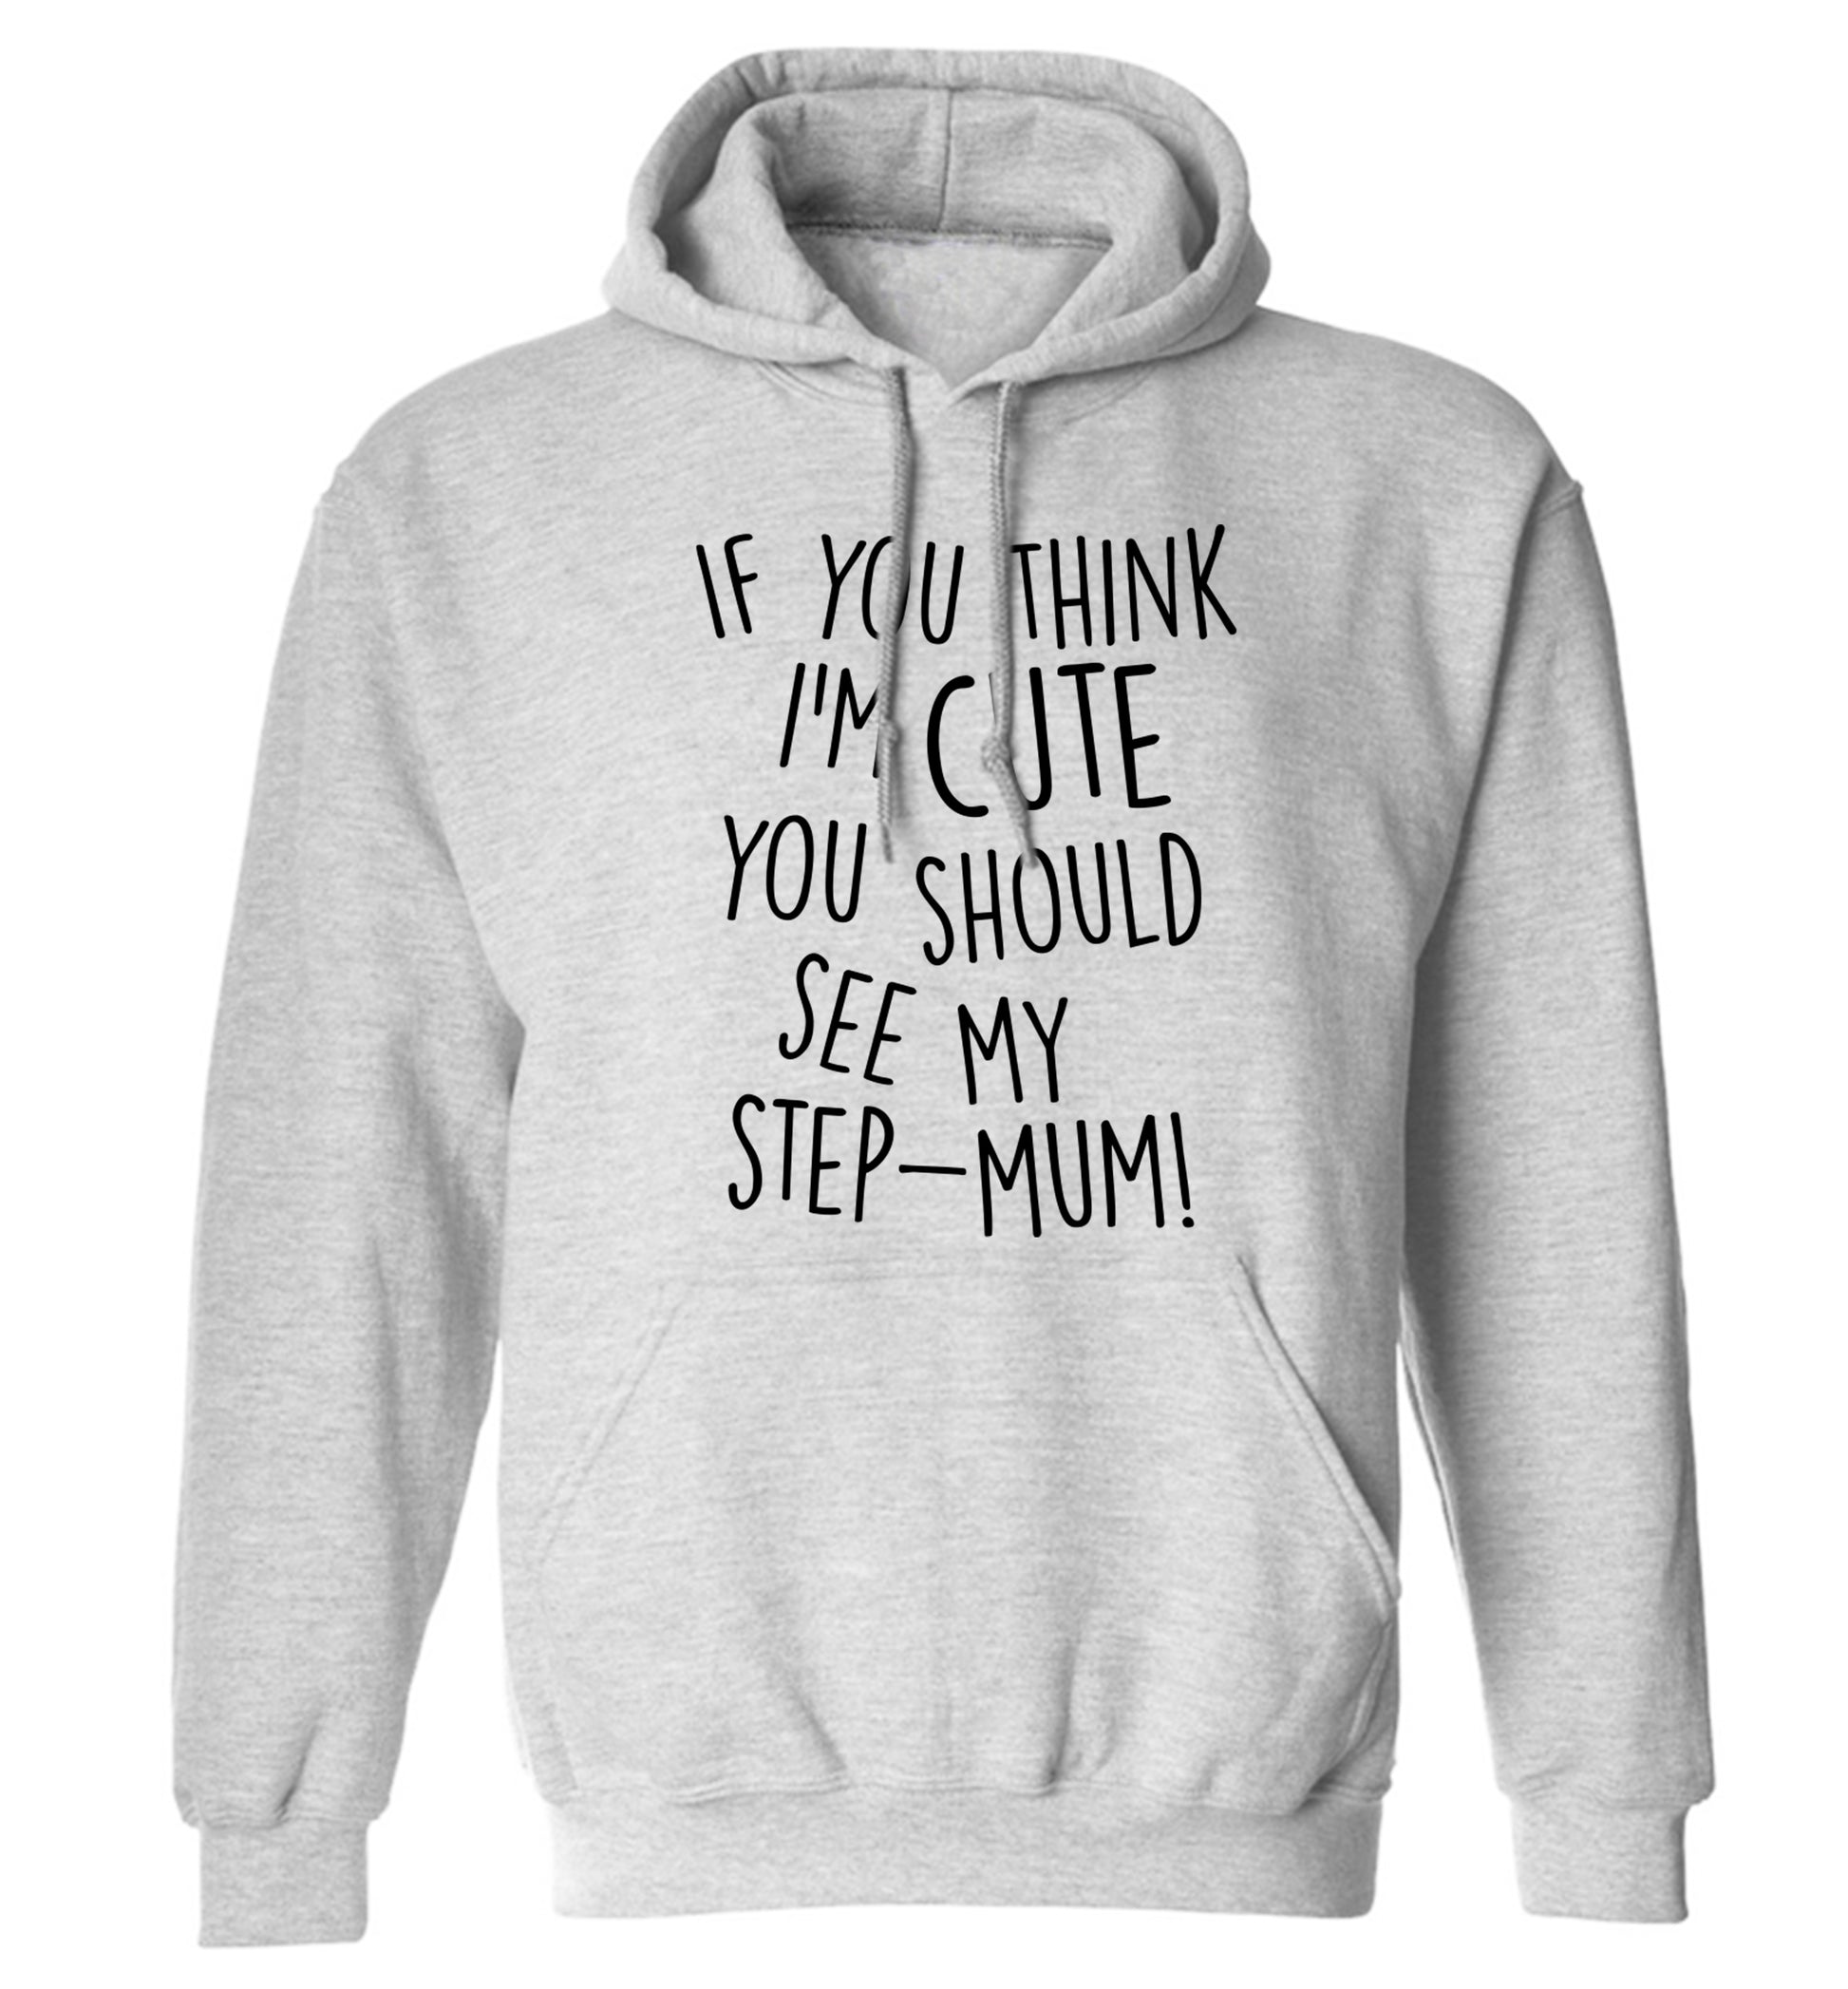 If you think I'm cute you should see my step-mum adults unisex grey hoodie 2XL